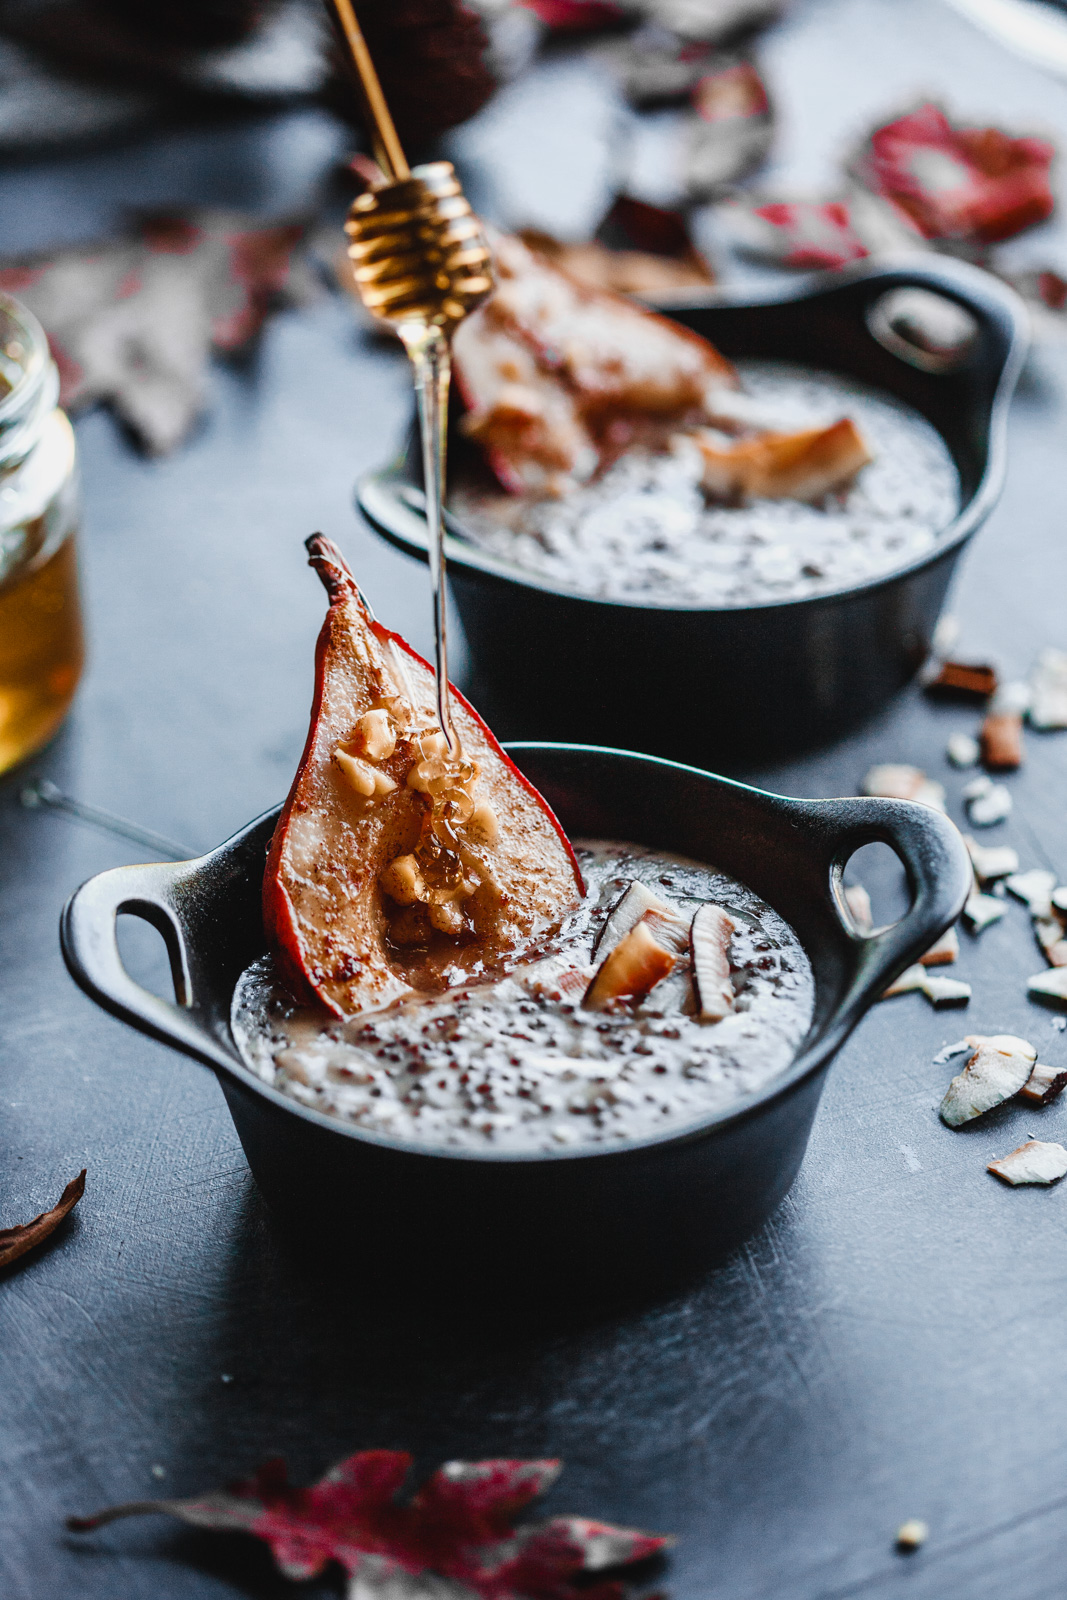 Spiced Quinoa Pudding With Baked Pears With Honey and Nuts